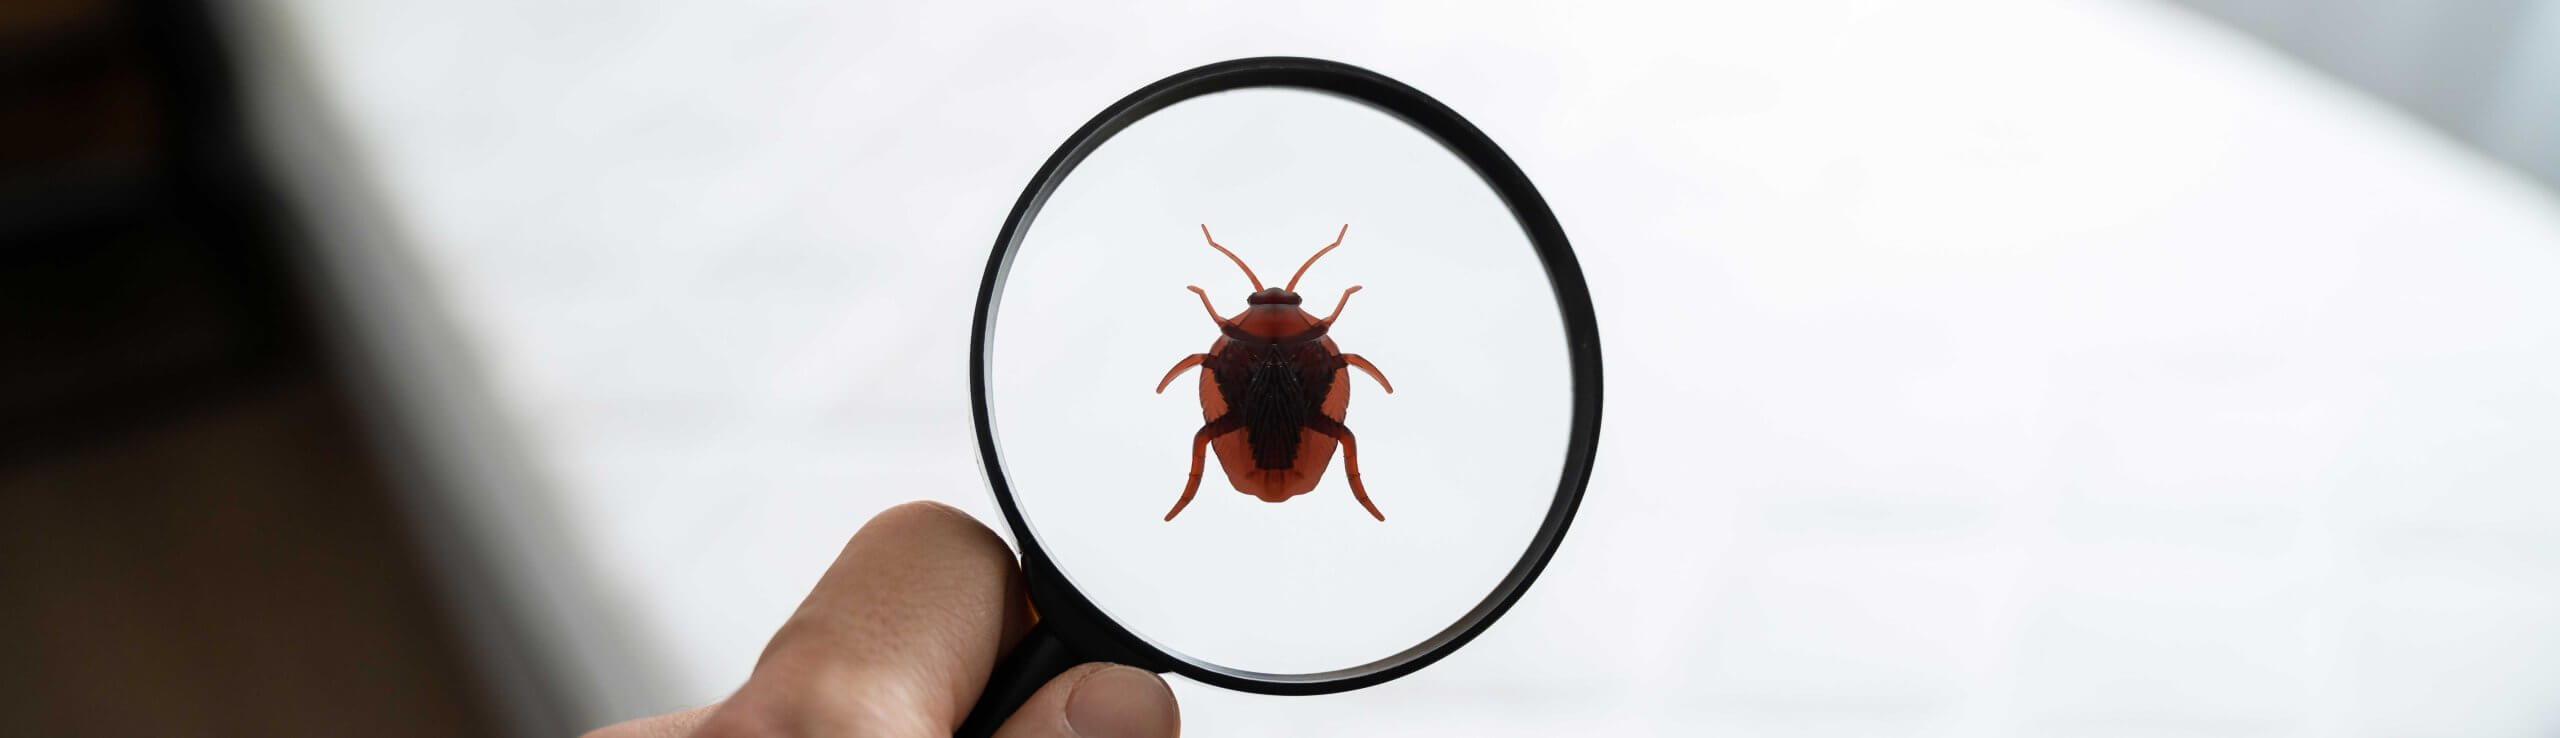 Bed Bug in magnifying glass